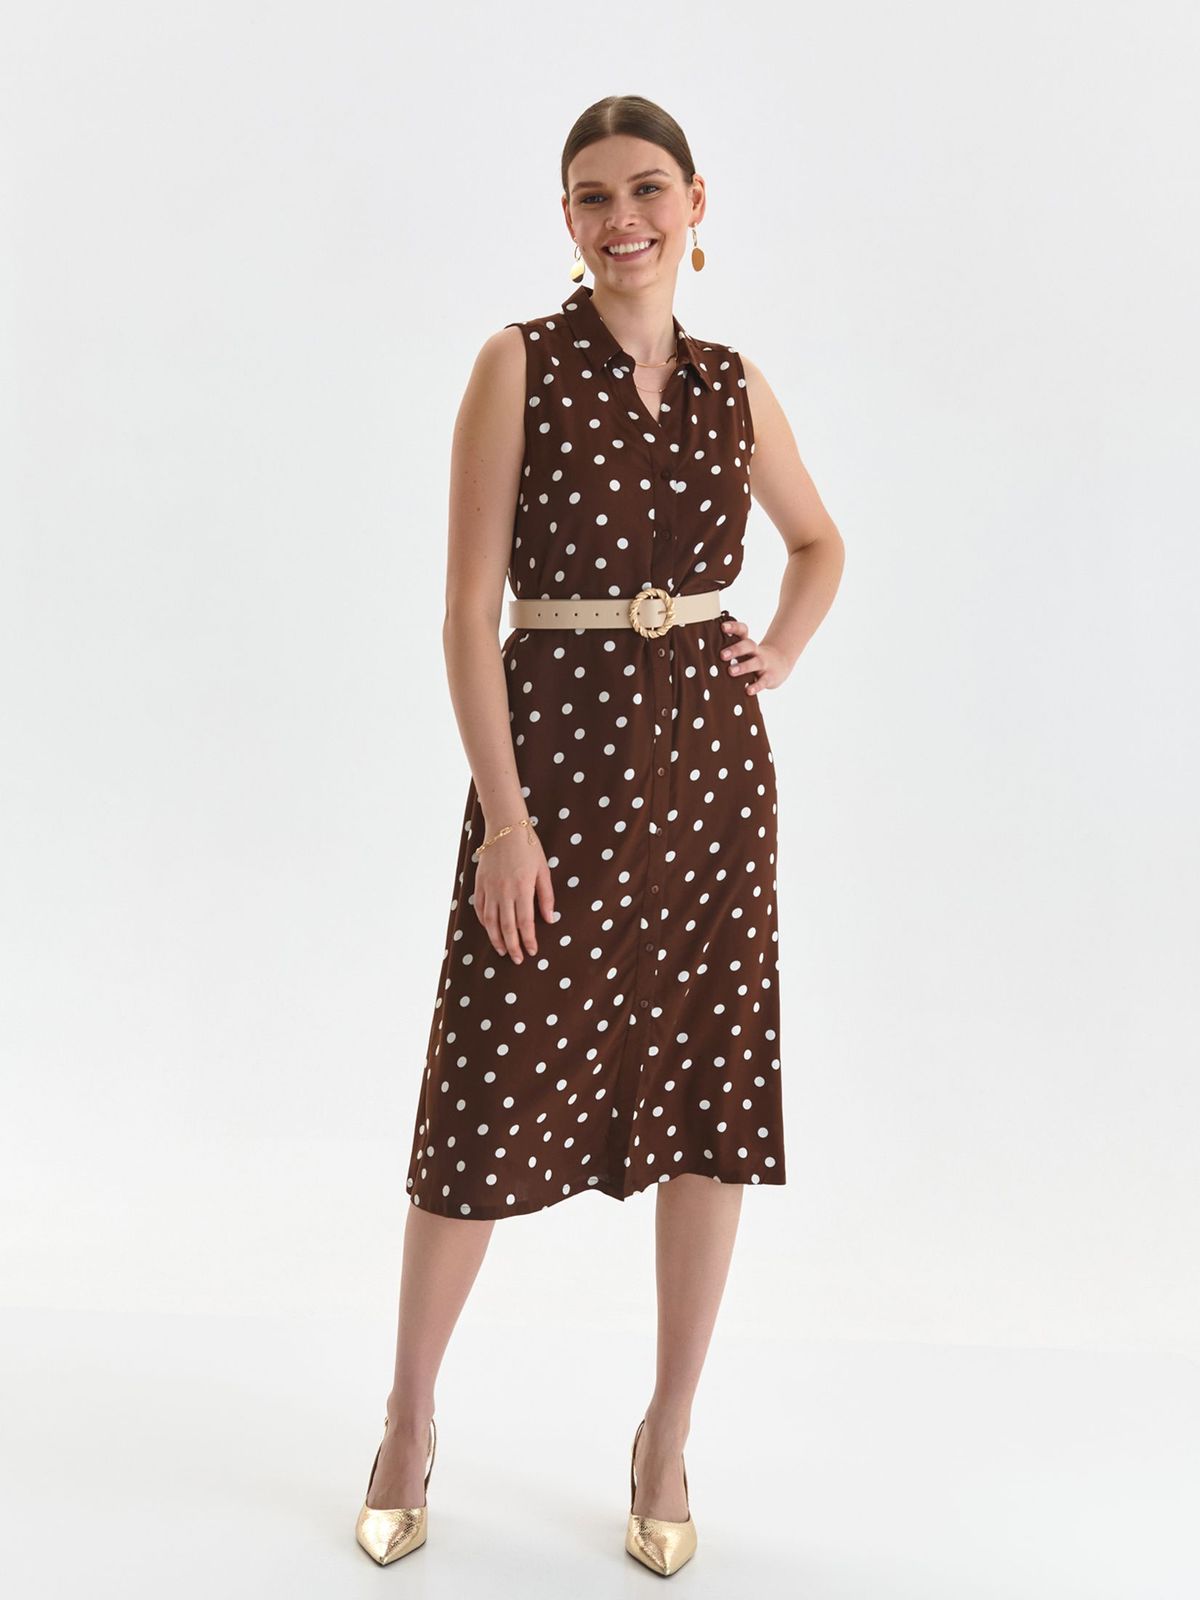 Brown dress light material shirt dress accessorized with tied waistband 4 - StarShinerS.com